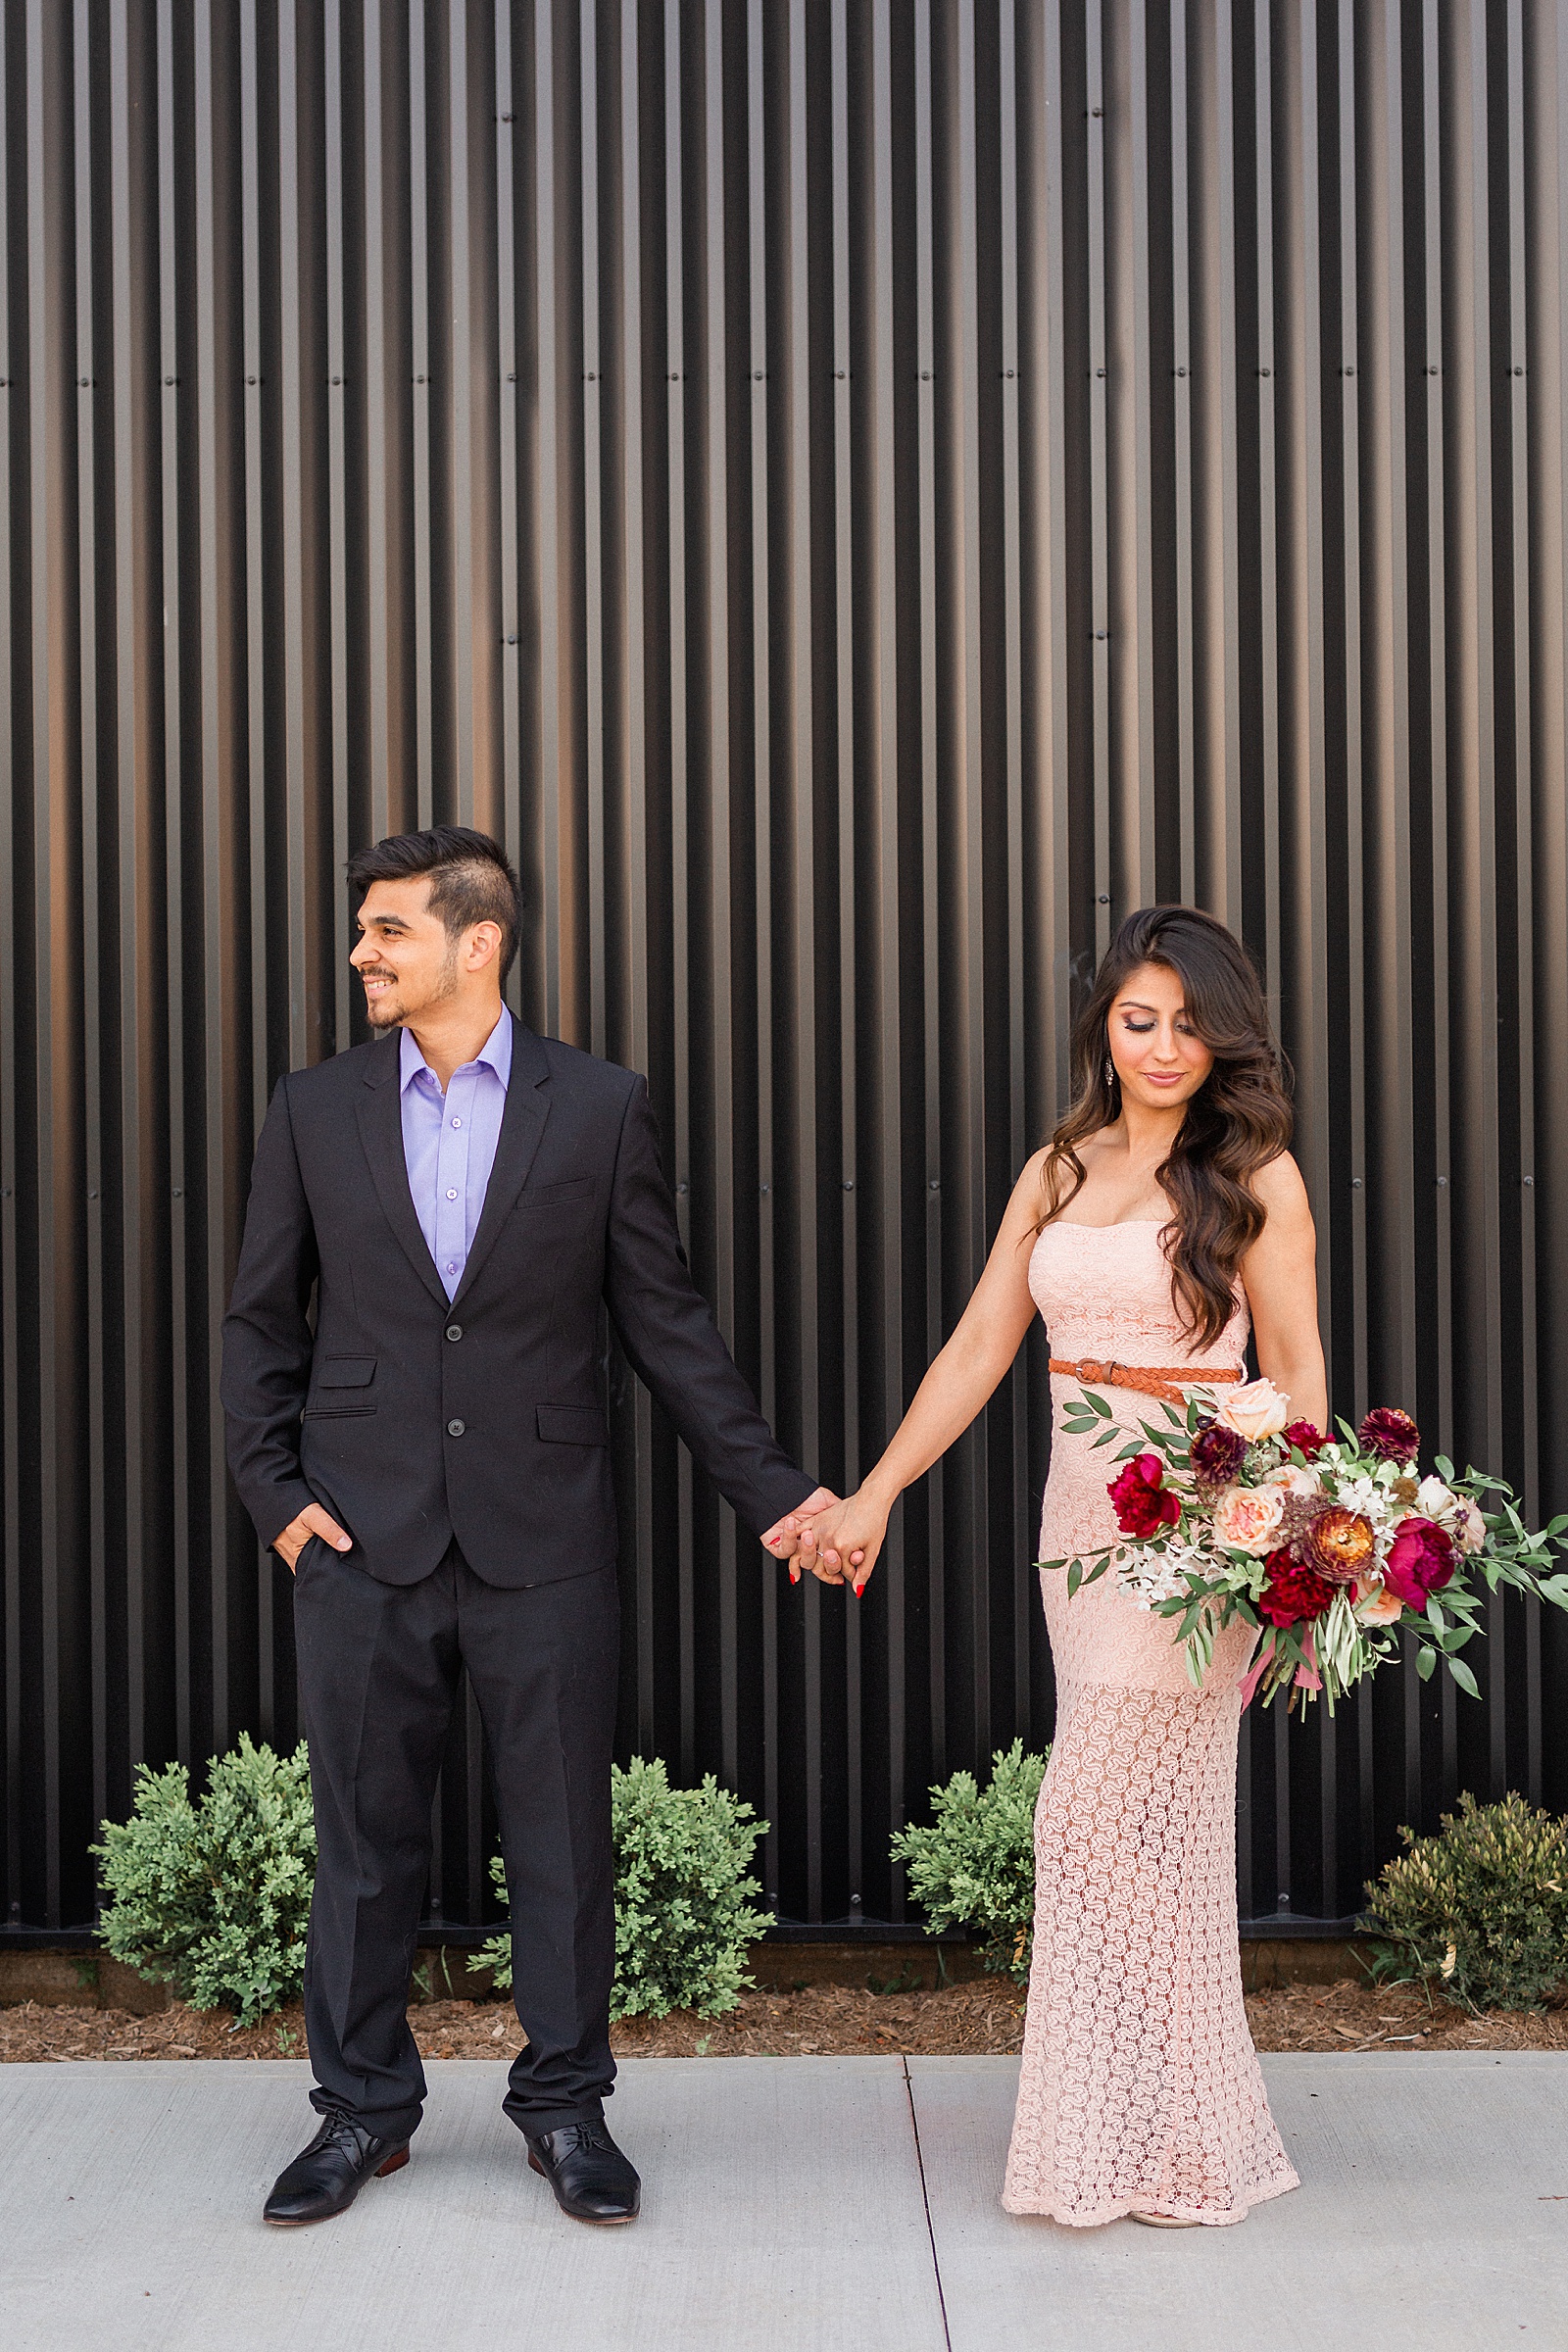 Engagement session at Storehouse408